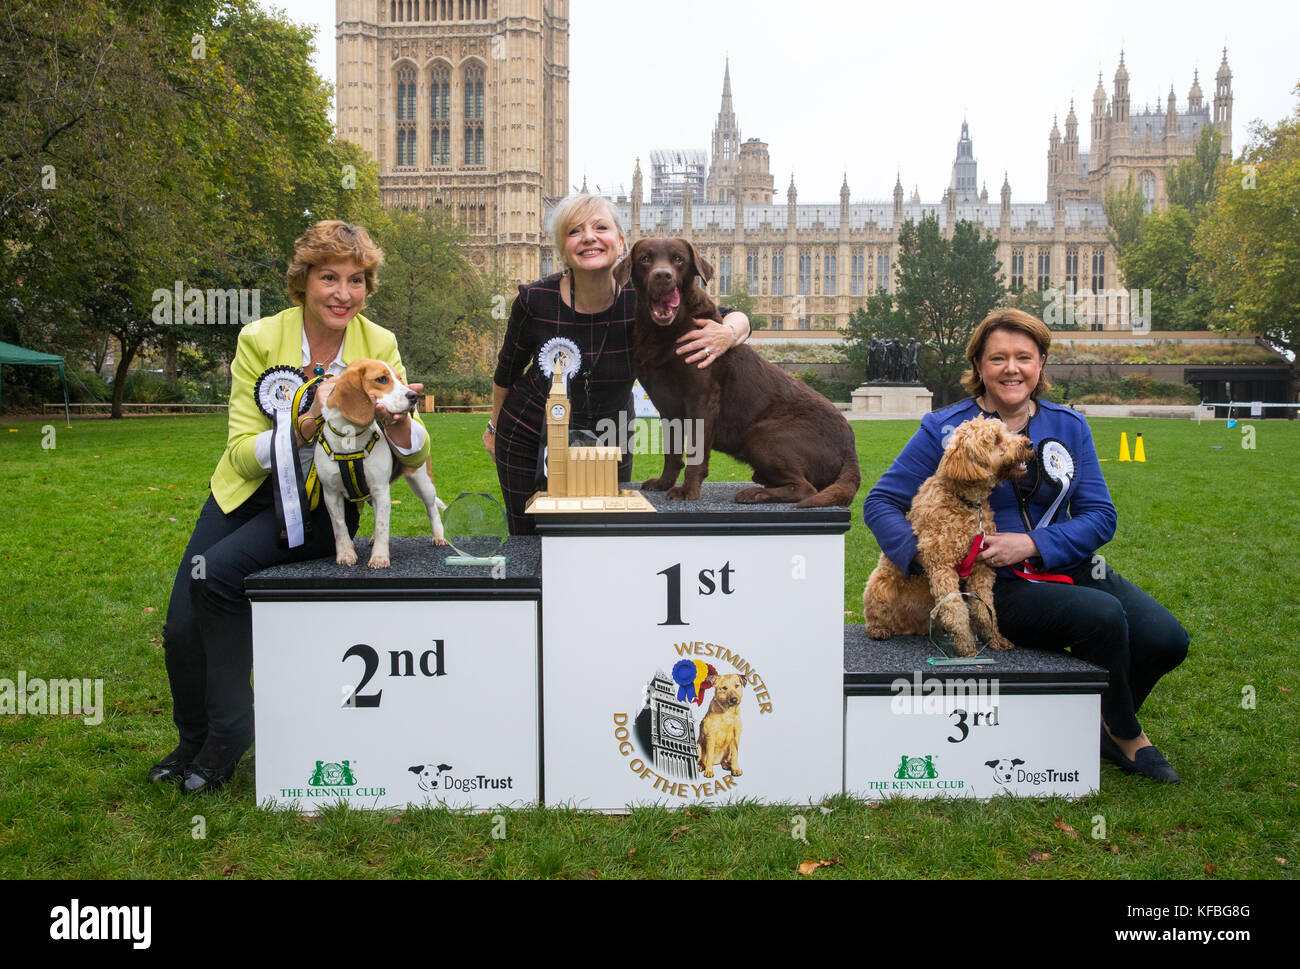 Actress and MP for Batley and Spen, Tracy Brabin, wins The Westminster Dog of The year Show 2017 with her dog 'Rocky'.She took over from Jo Cox Stock Photo